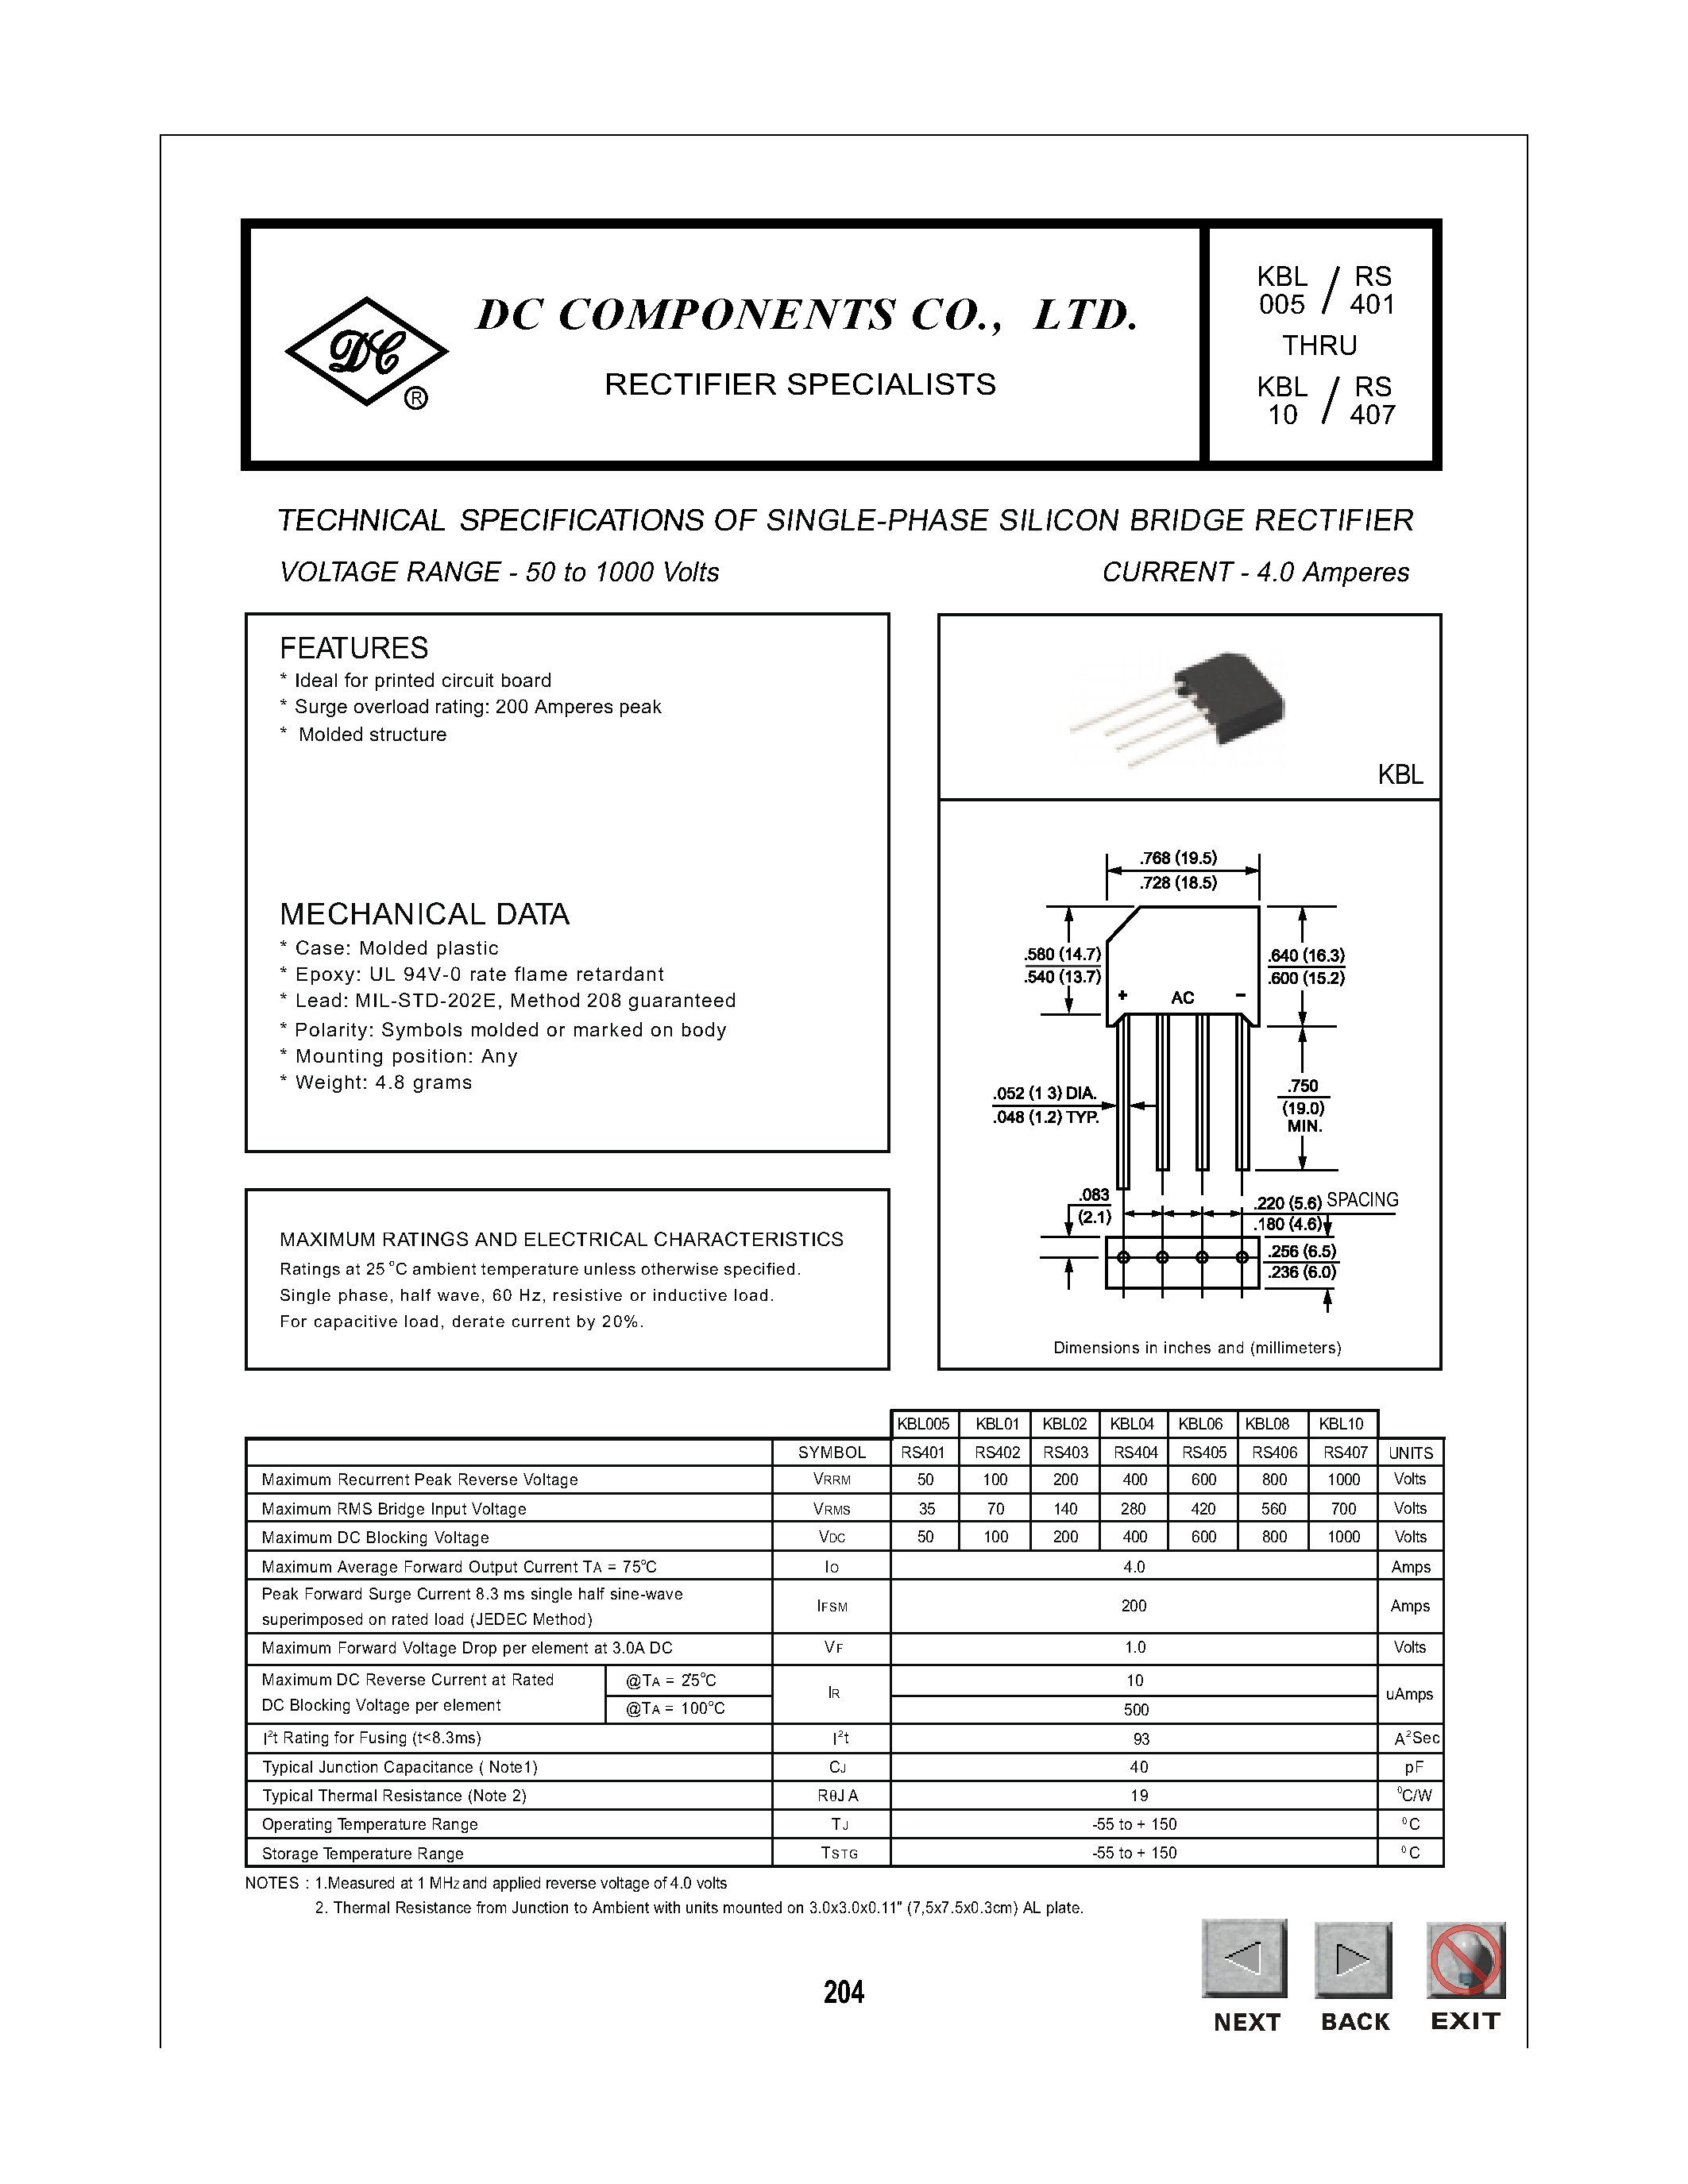 Datasheet KBL01 - TECHNICAL SPECIFICATIONS OF SINGLE-PHASE SILICON BRIDGE RECTIFIER page 1